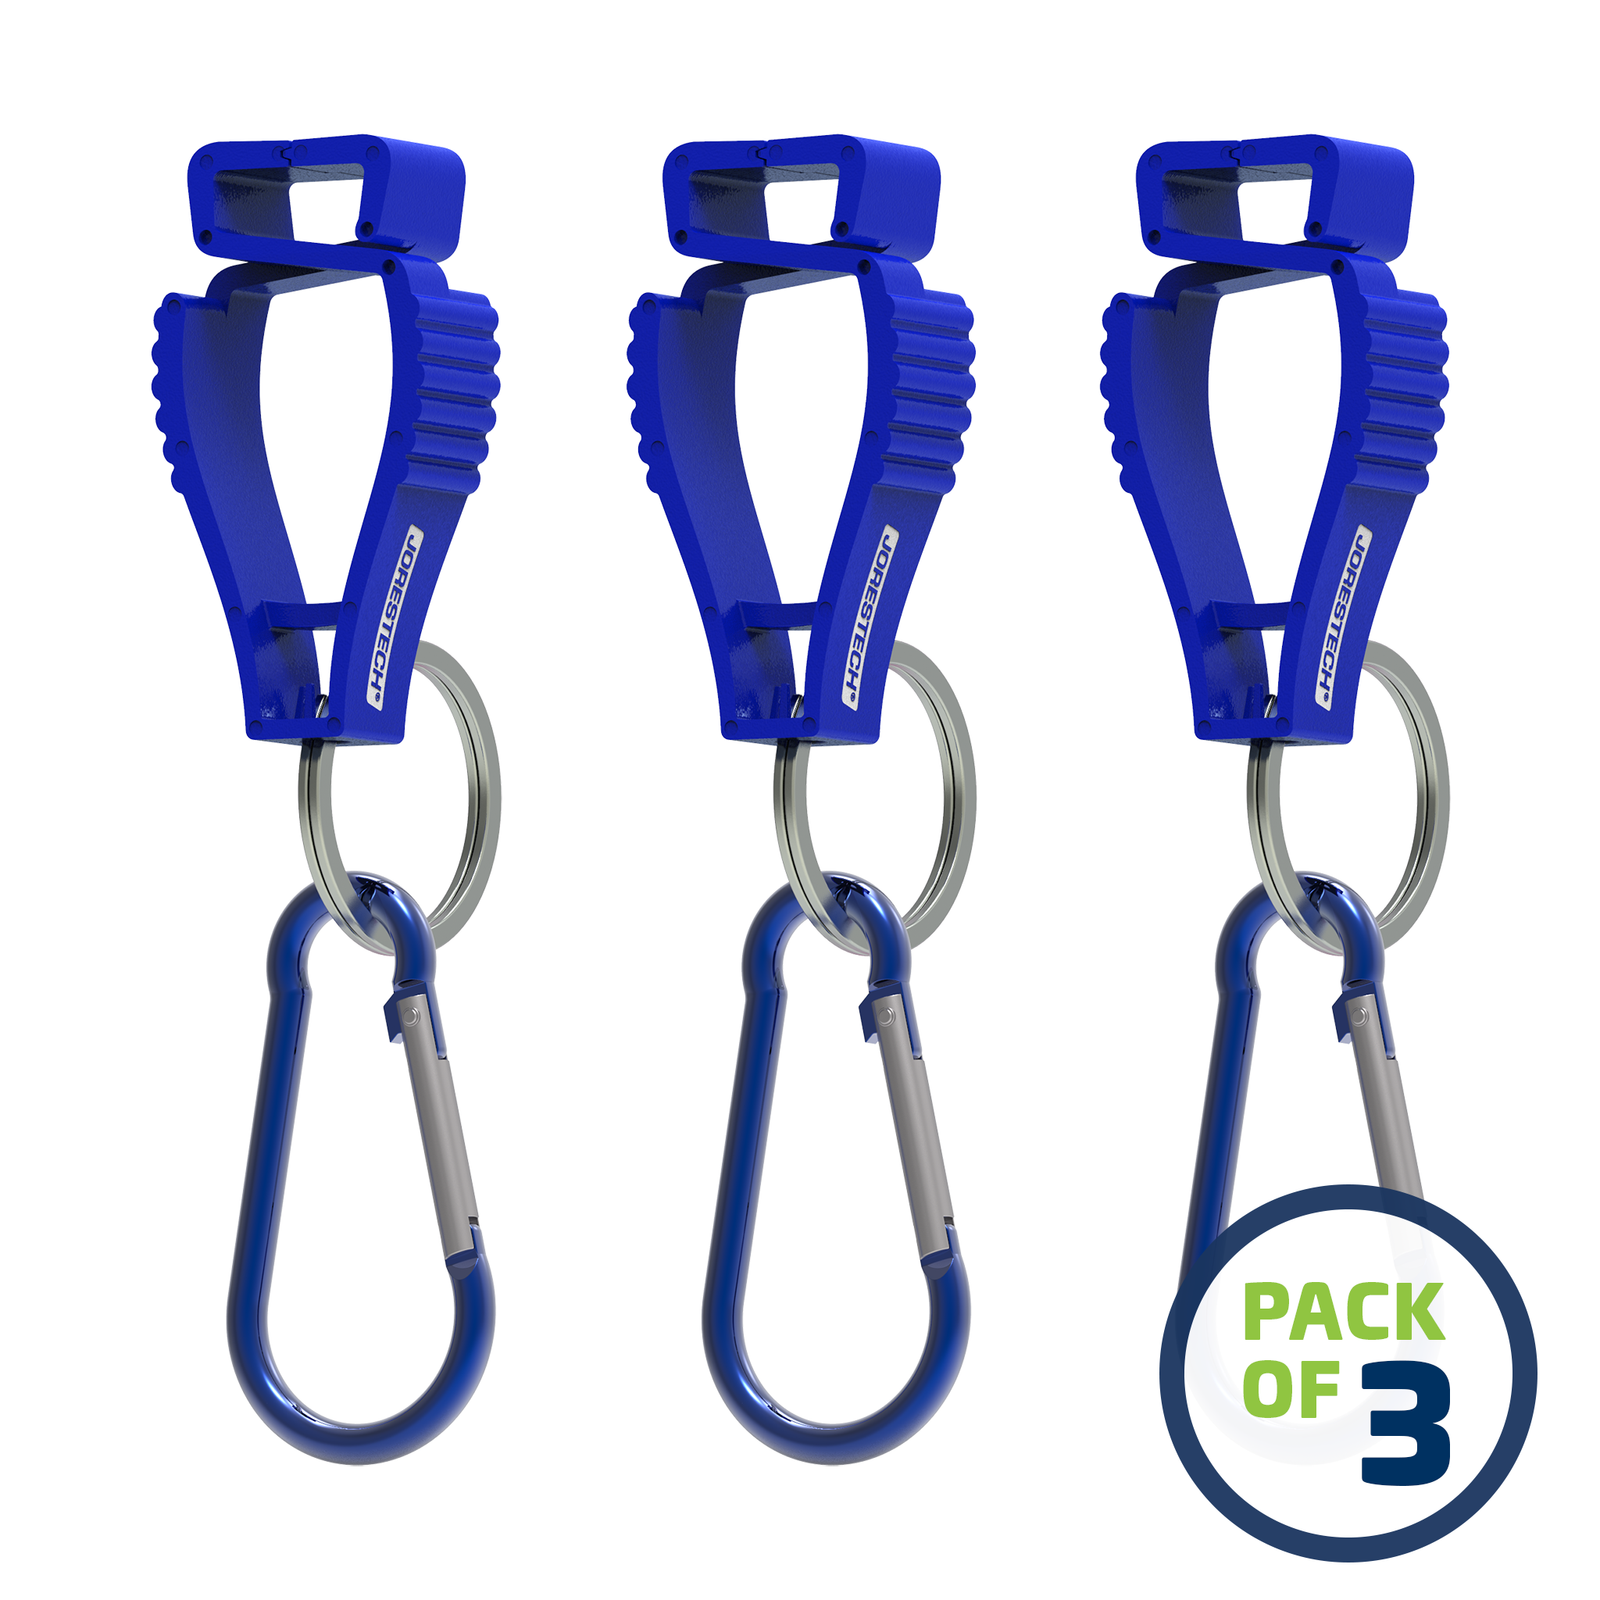 image of a pack of 3 Blue JORESTECH glove clip safety holders with carabiner over white background